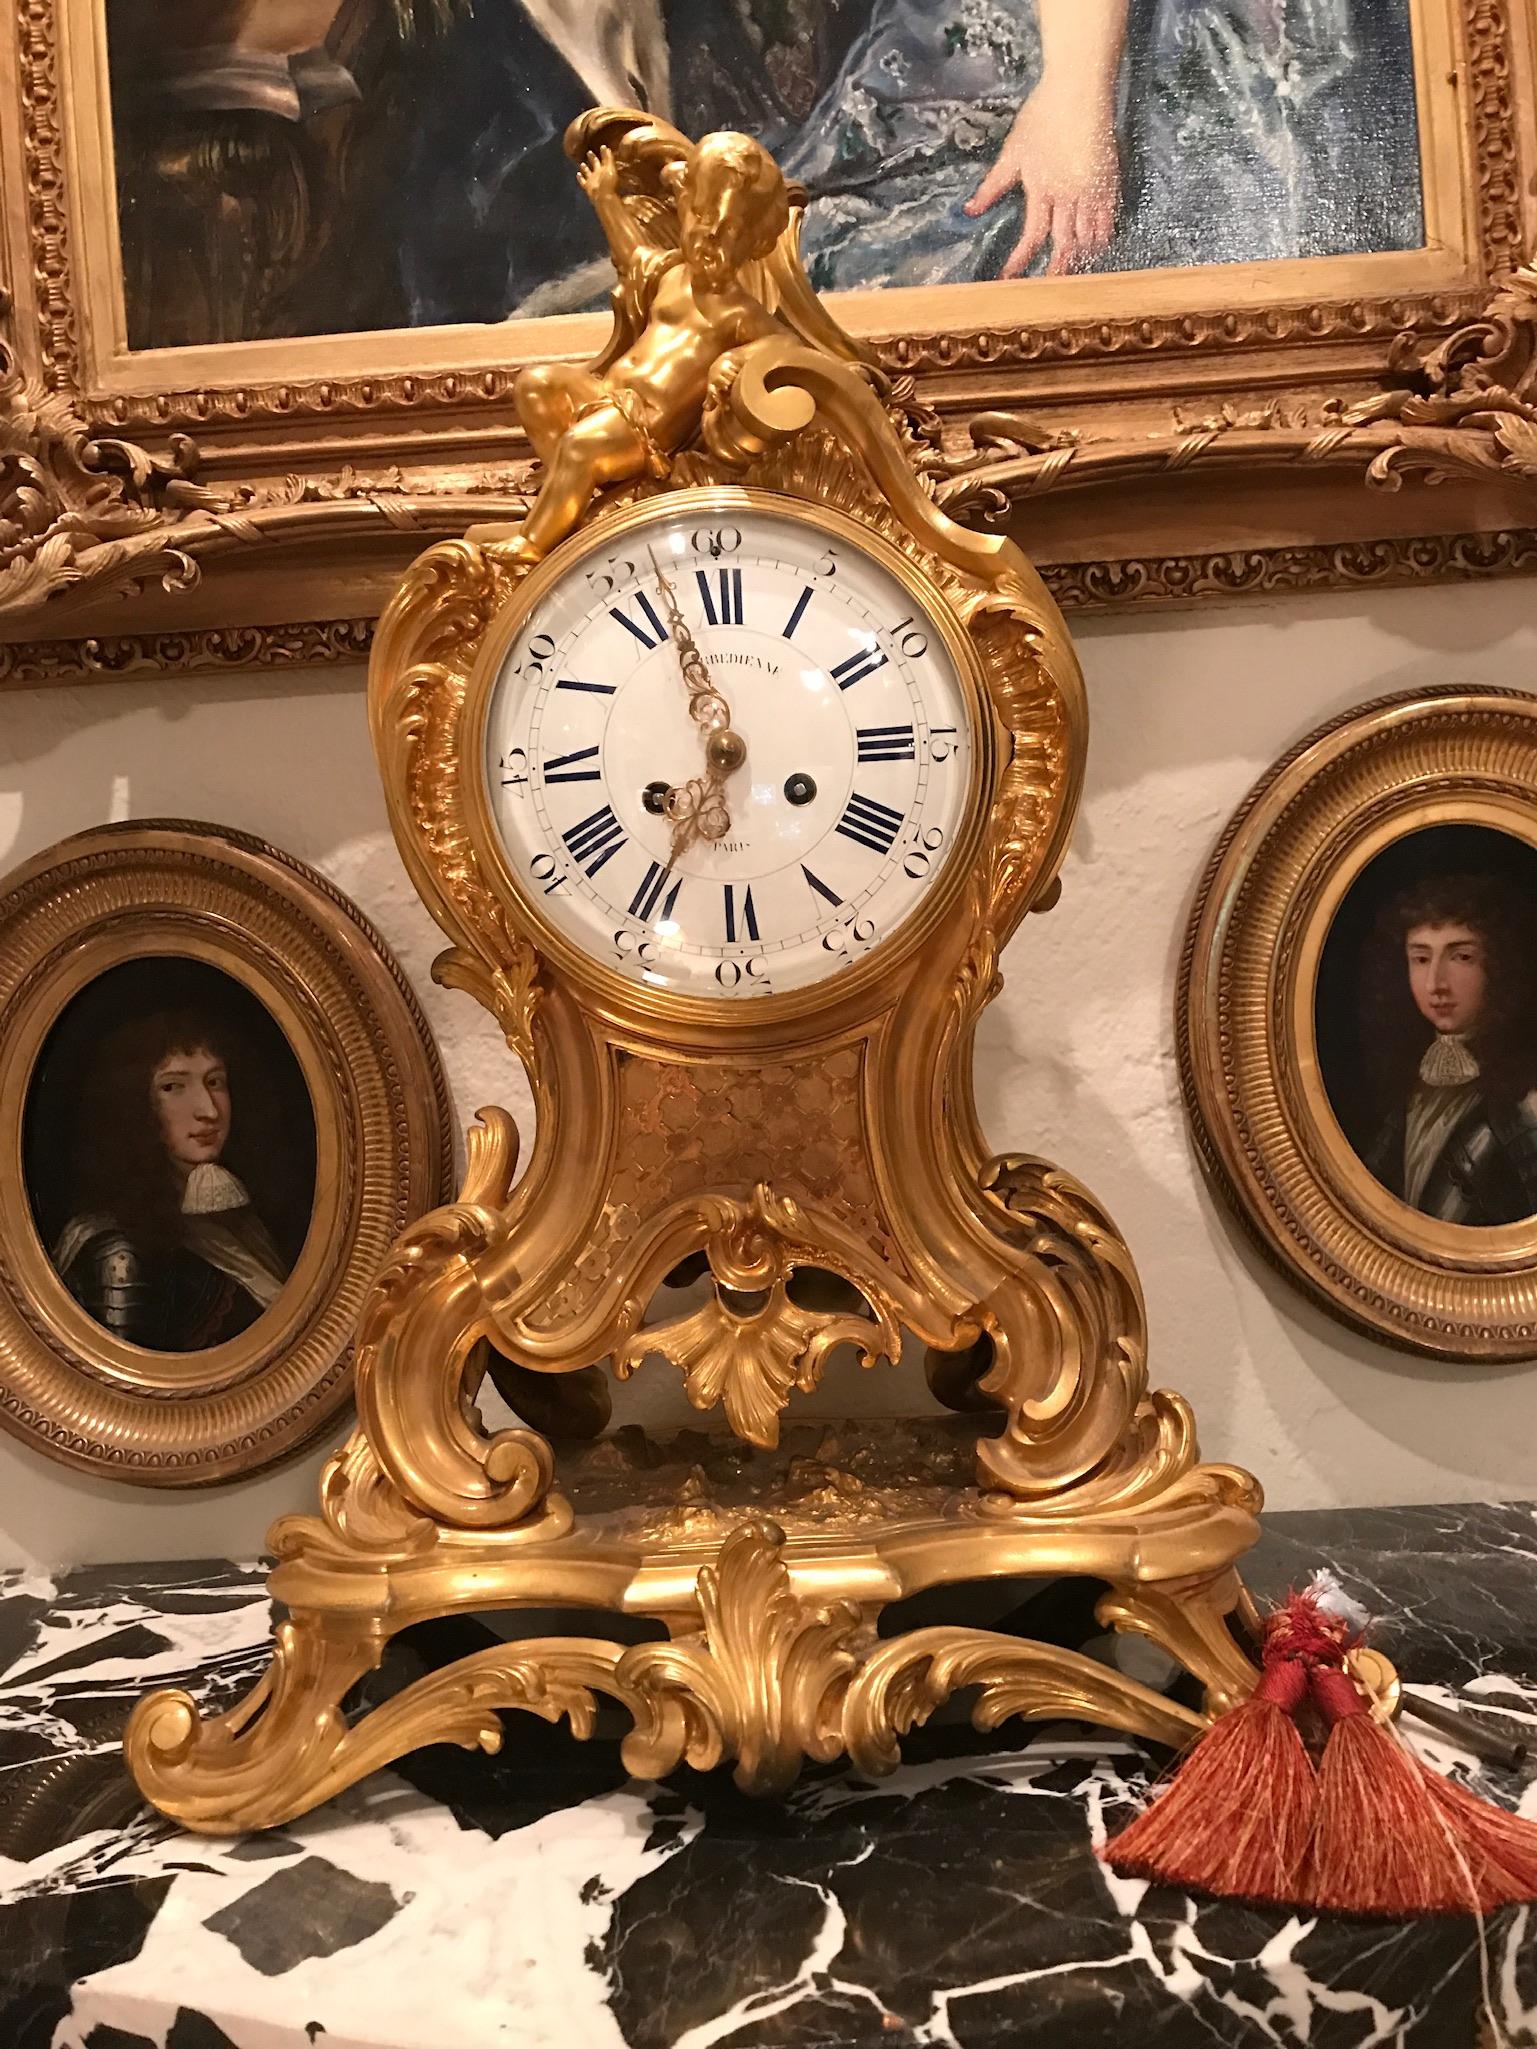 F. Barbedienne Foundry created both the case, and the movement of this spectacular, gilt bronze mantel clock. The case was expertly crafted by the celebrated French bronzeur sculpteur Ferdinand Barbedienne in the mid to late 19th century. The